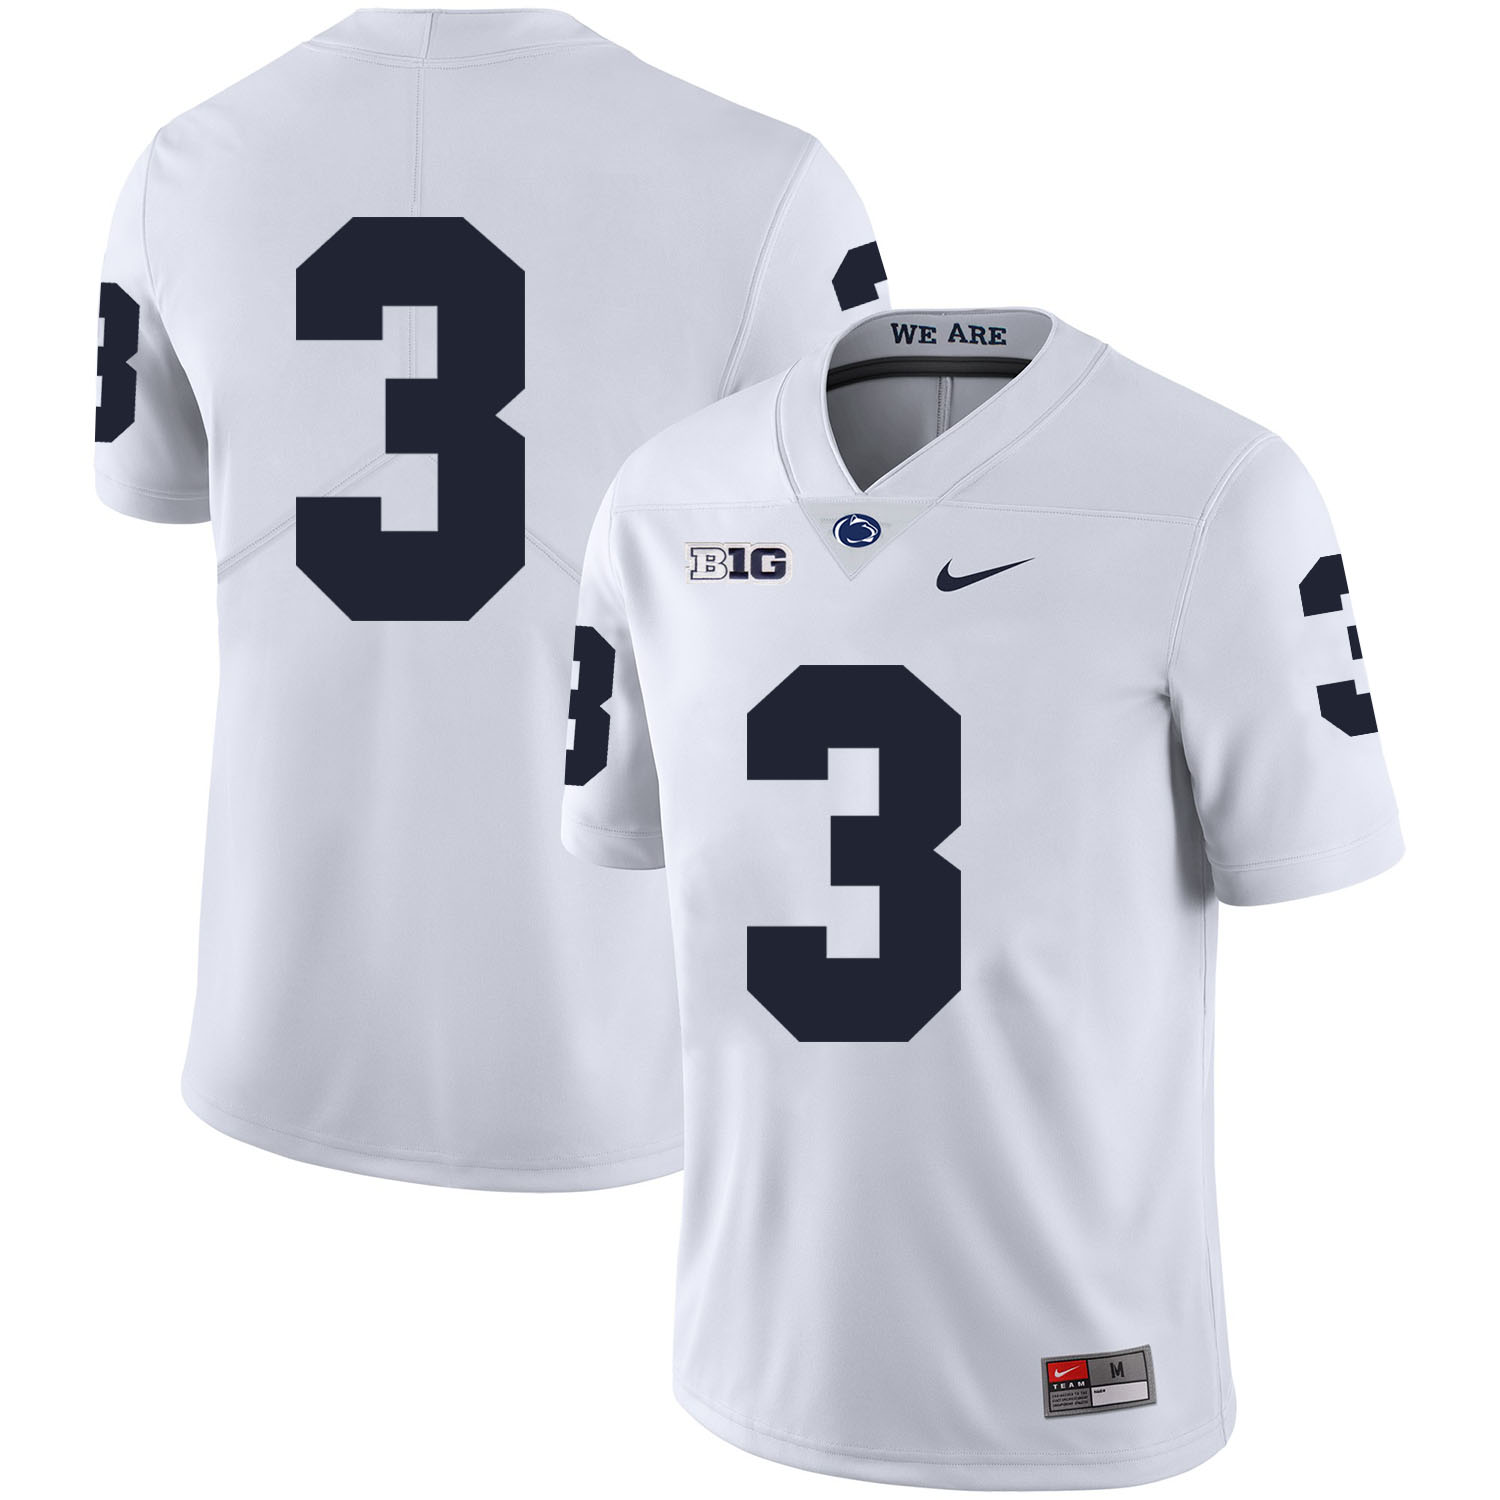 Penn State Nittany Lions 3 DeAndre Thompkins White Nike College Football Jersey